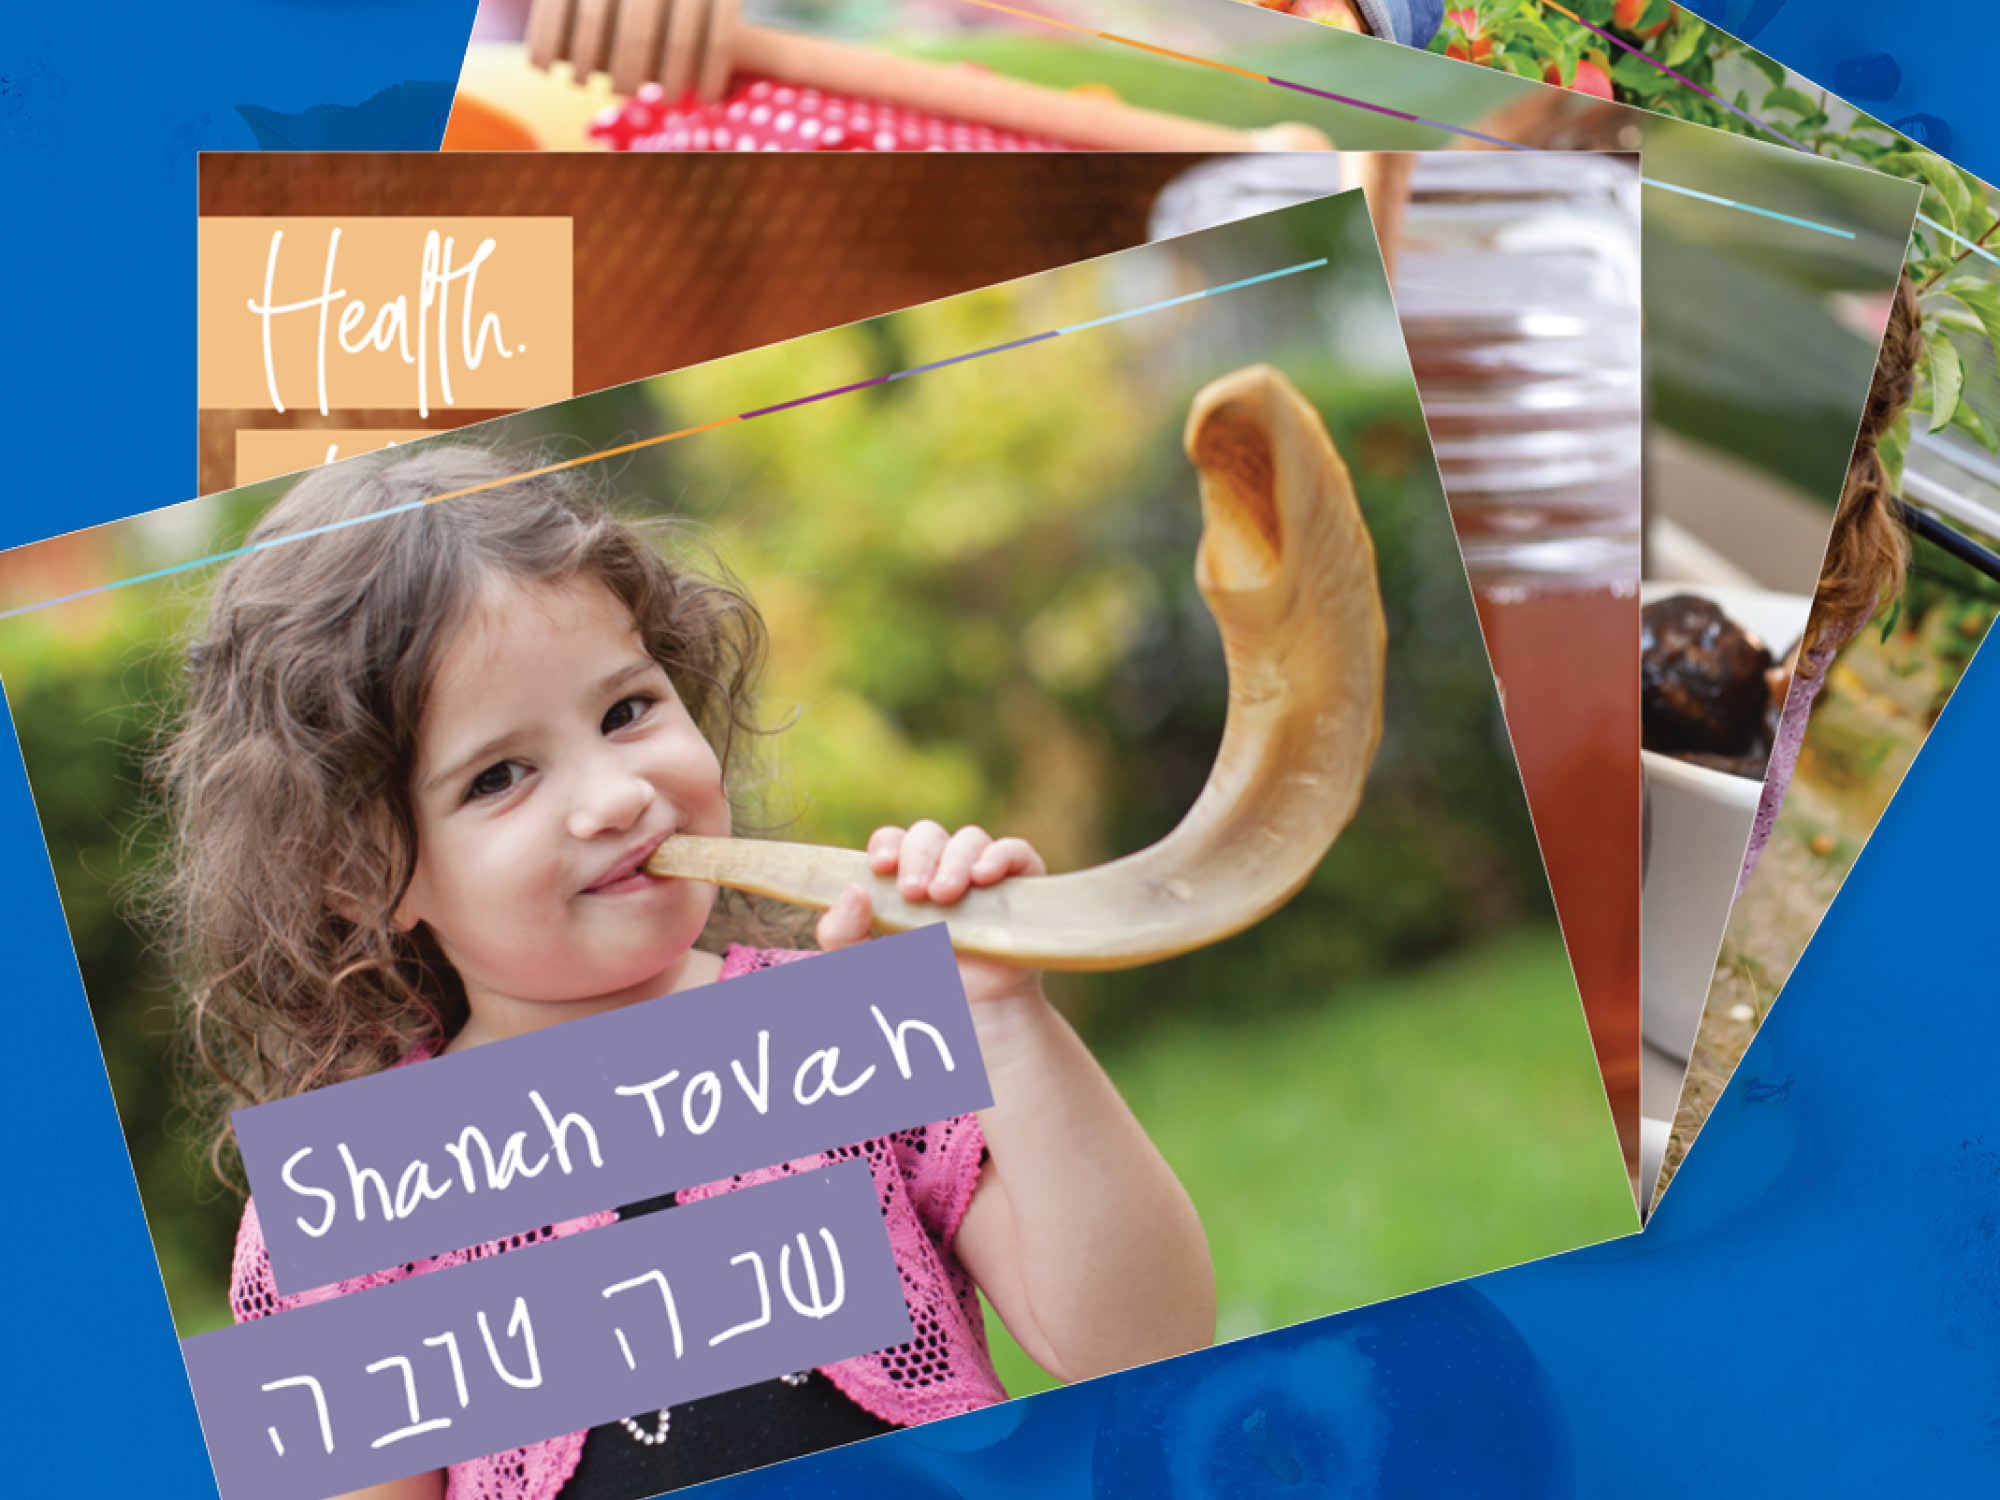 A good year: Ready or not, here comes Rosh Hashanah - JNS.org